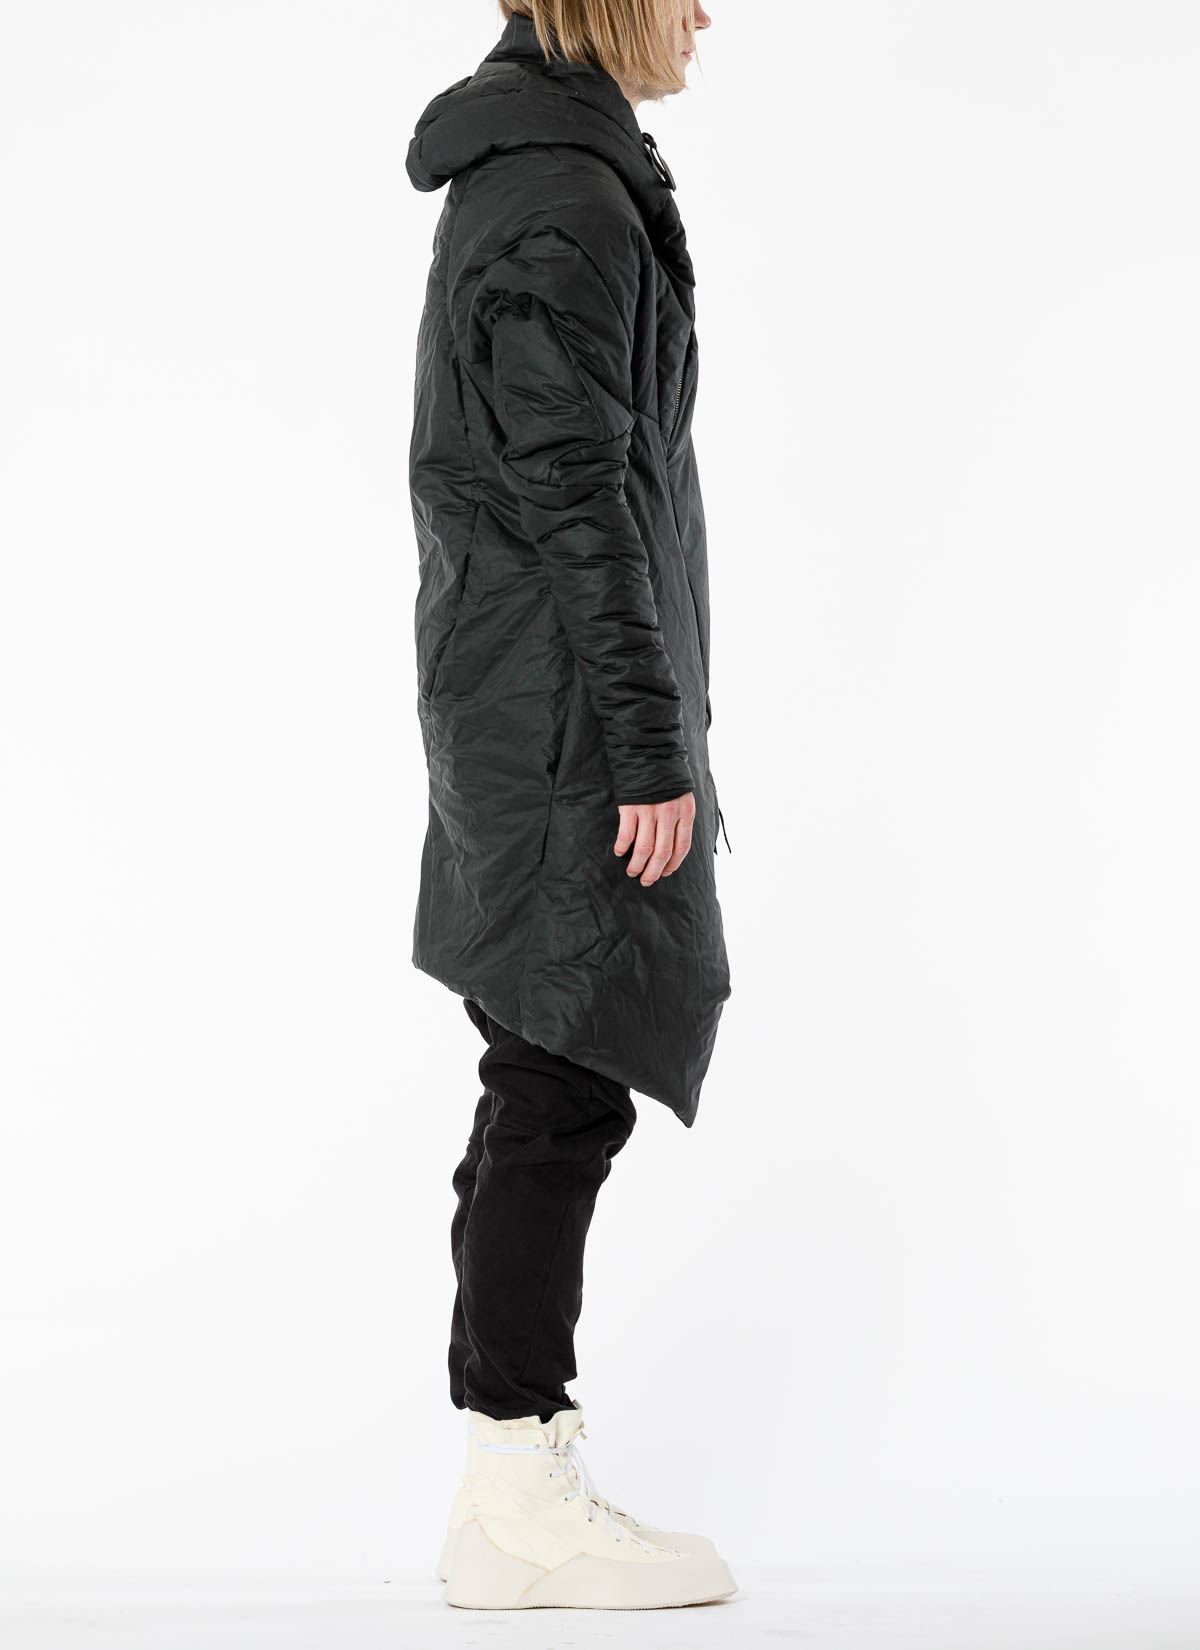 hide-m | LEON EMANUEL Coat, cotton Curved waxed Hooded BLANCK